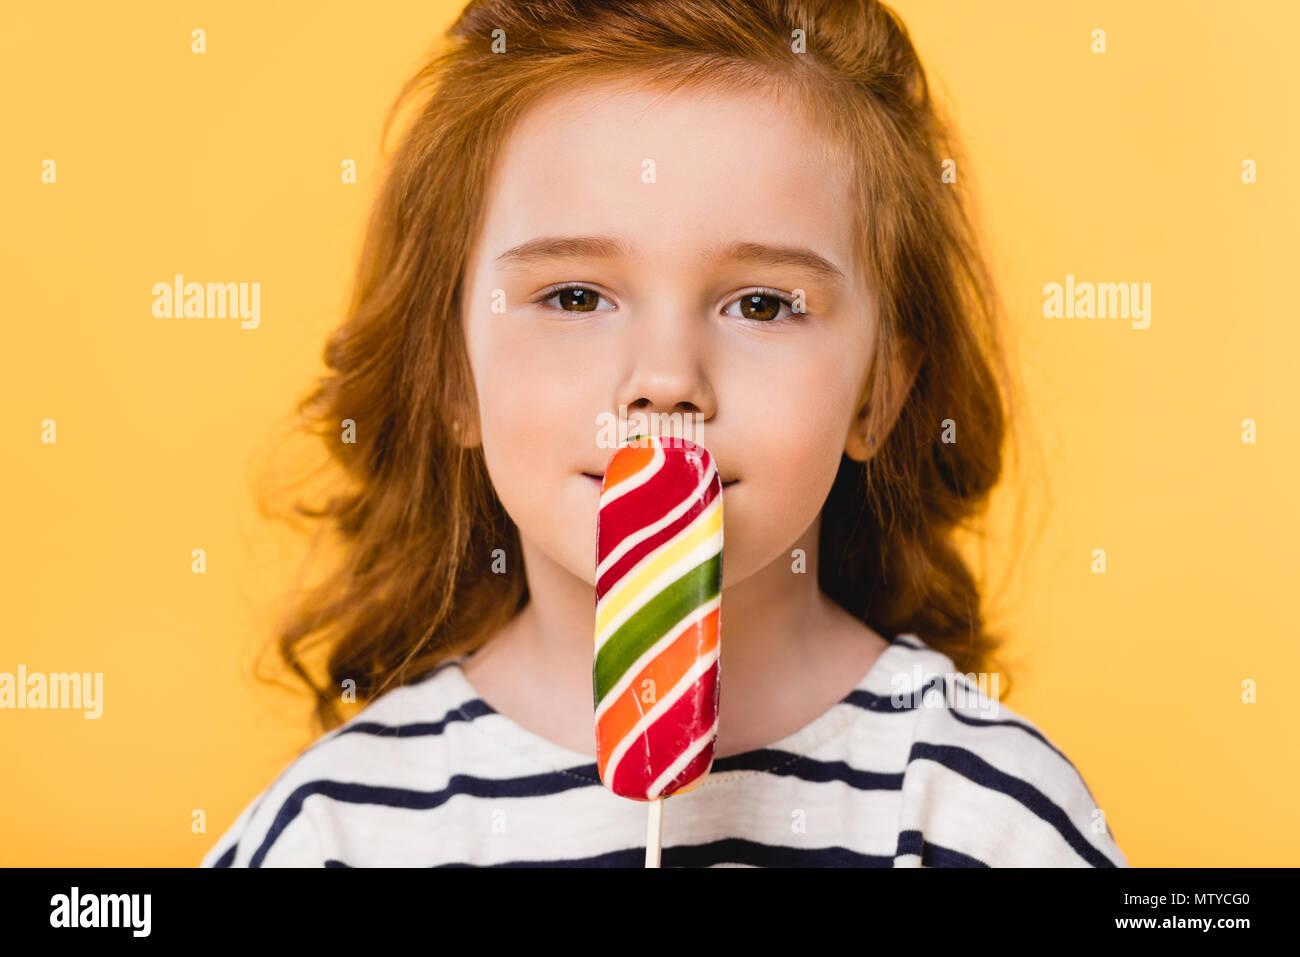 portrait of preteen child eating lollipop isolated on yellow Stock Photo